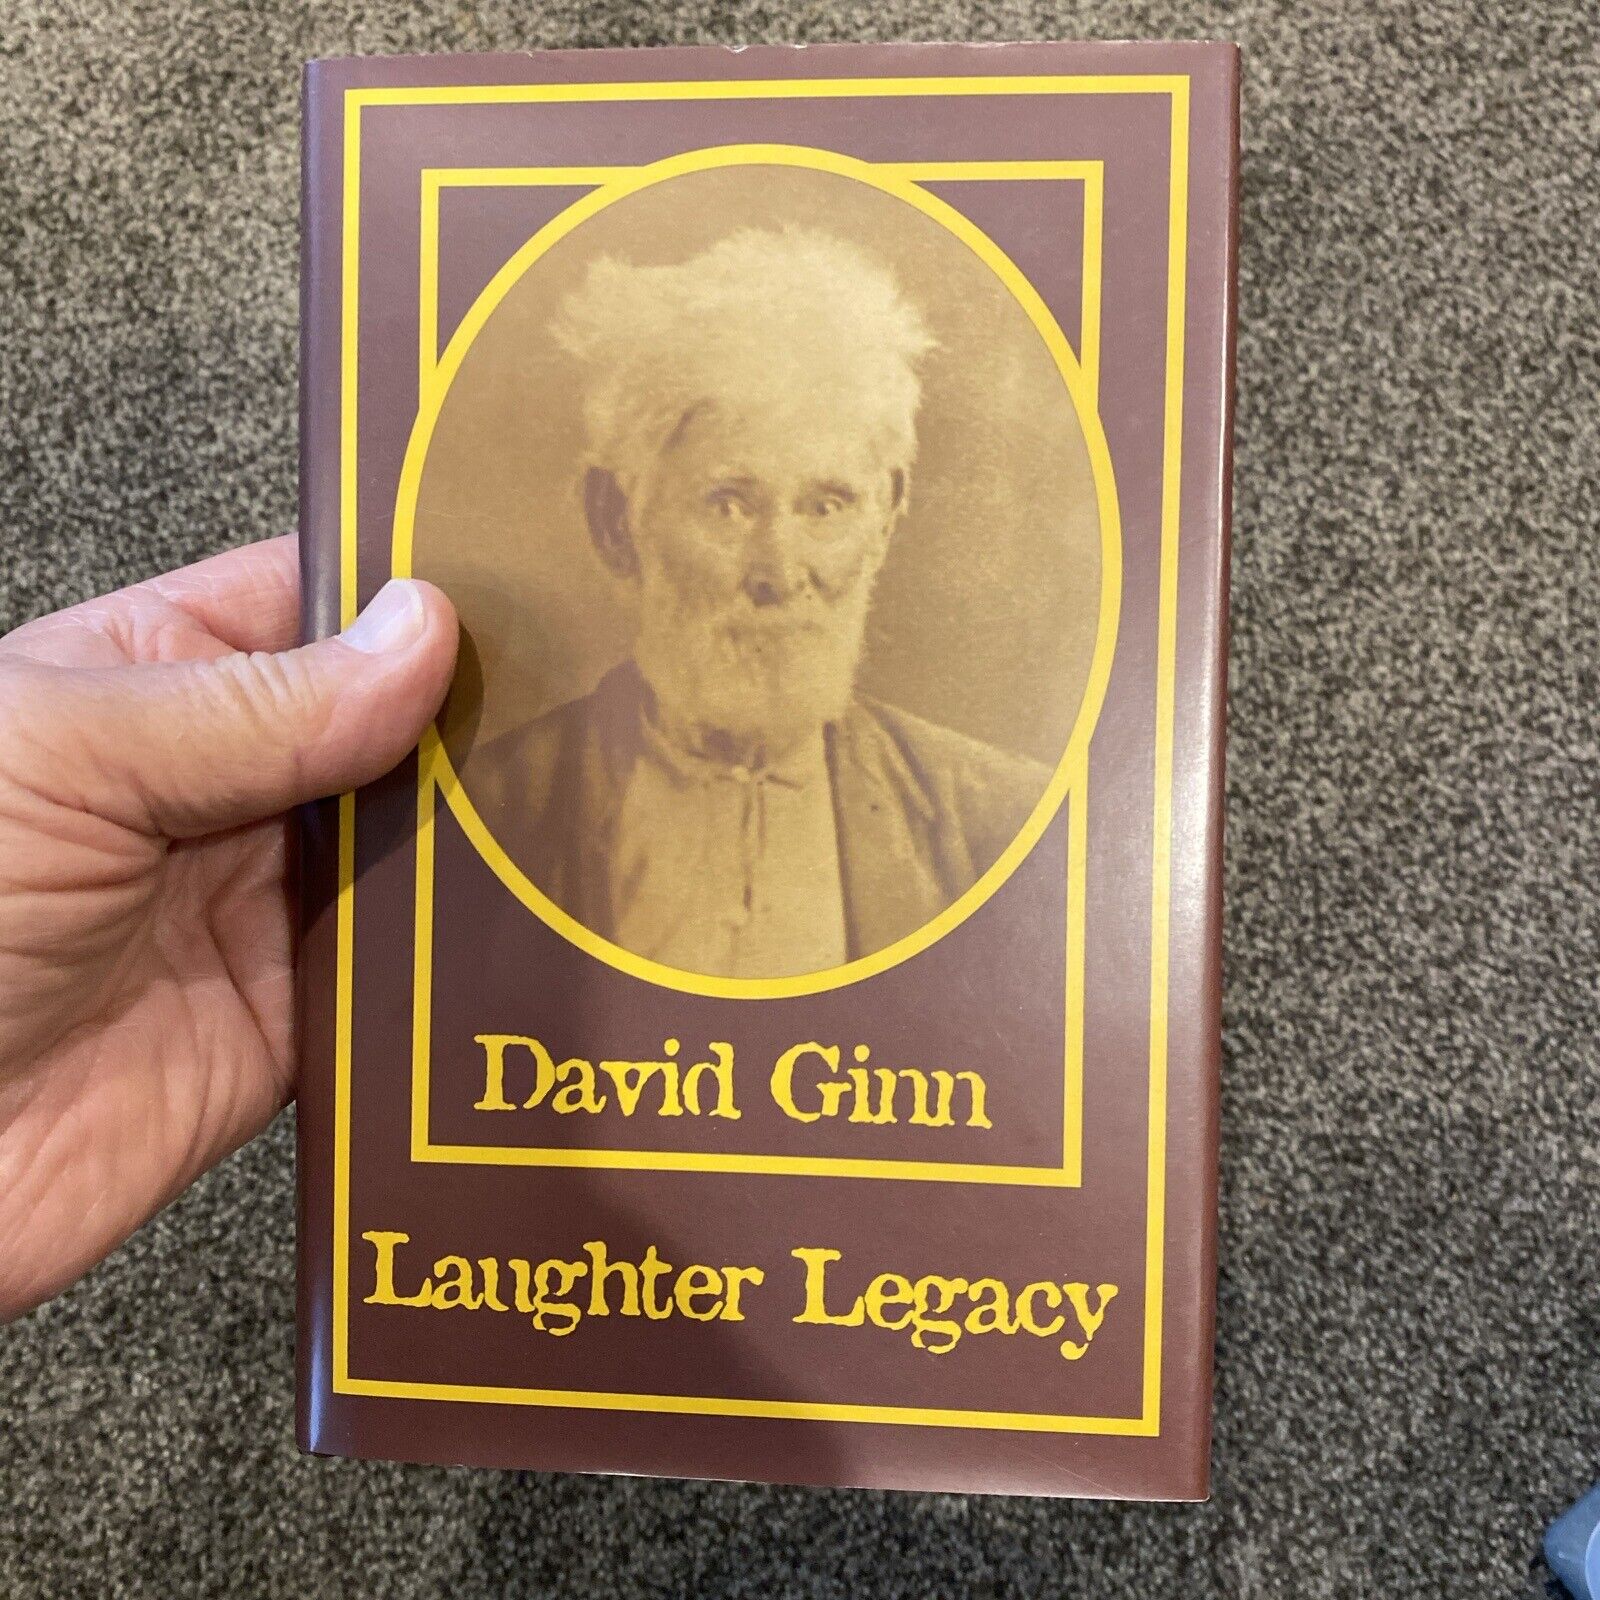 LAUGHTER  LEGACY by David Ginn